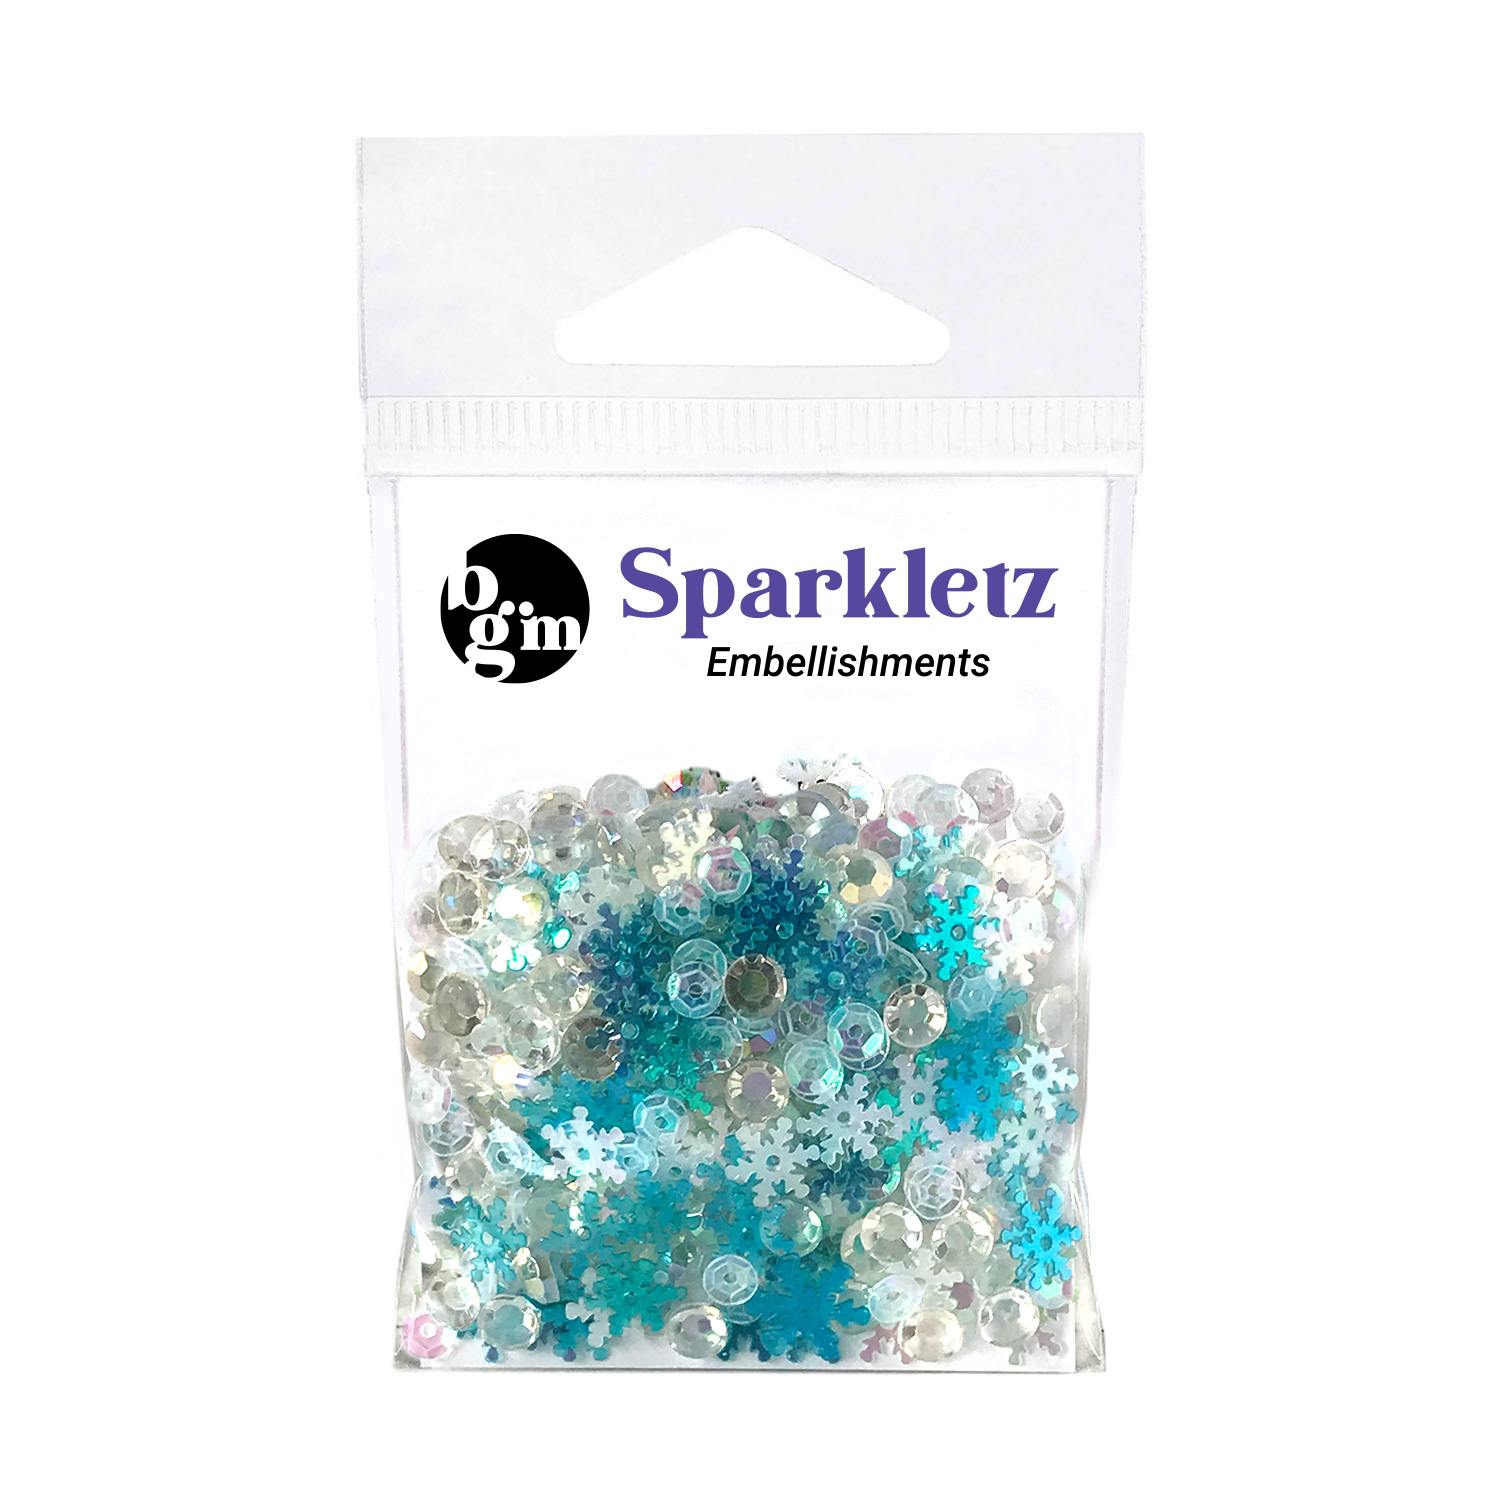 Buttons Galore Embellishments Iridescent Acrylic Gems, Shaped Sequins, Flat  Back Pearls Sparkletz for Crafts Sewing Paper Crafts - Winter Wonder- 3  Pack 30 Grams 